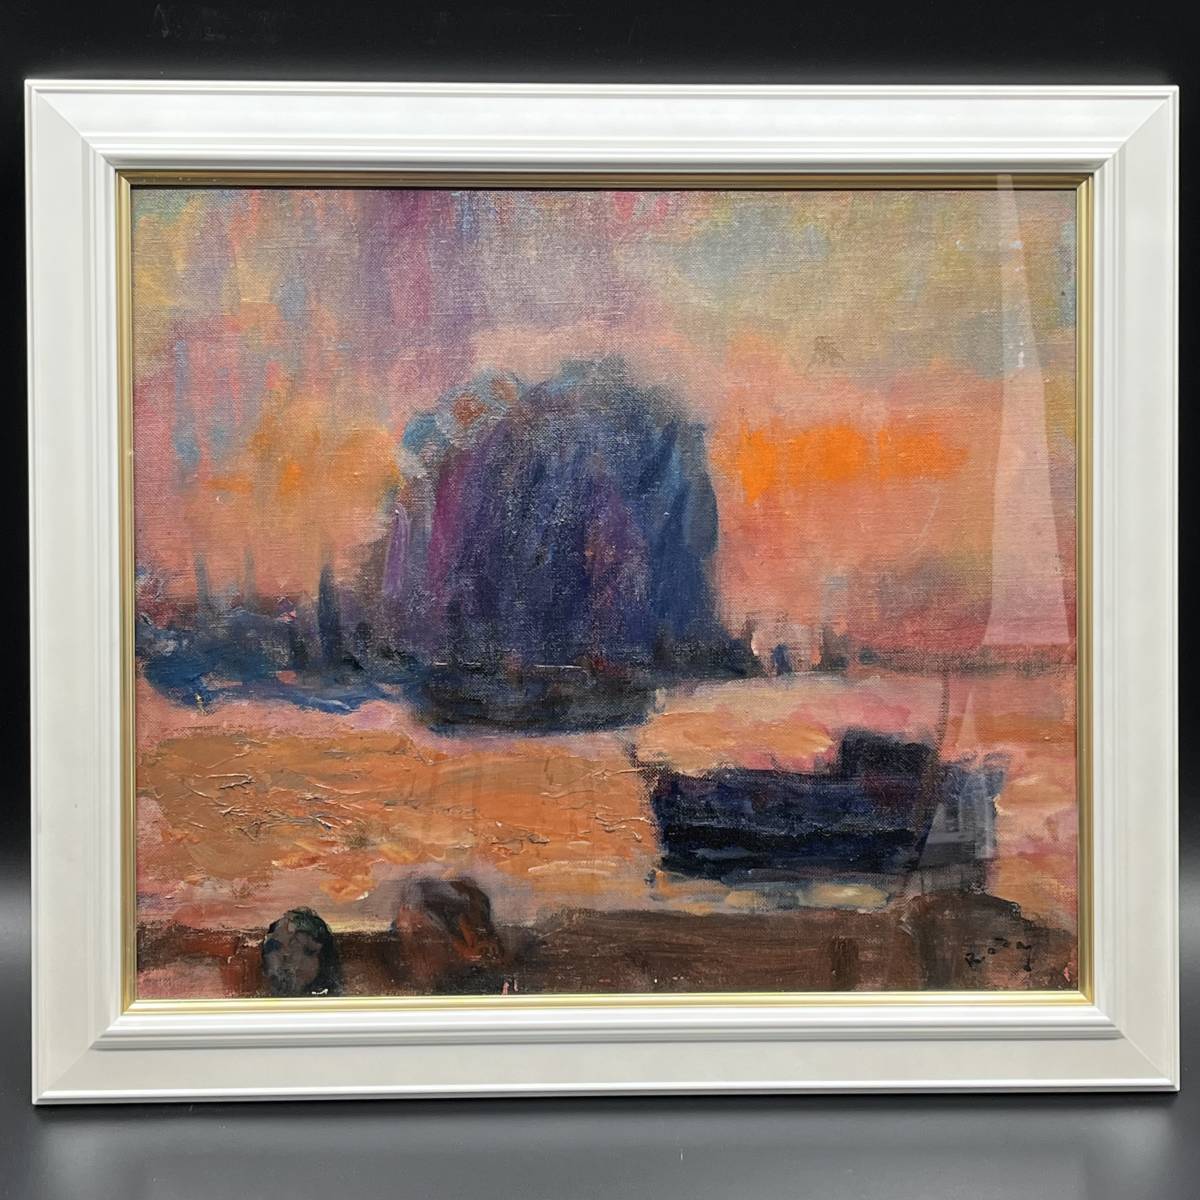 [Framed] Oil painting by Ryu Oda Fishing Port Twilight F10 Original painting ☆Box and signature included☆, Painting, Oil painting, Nature, Landscape painting